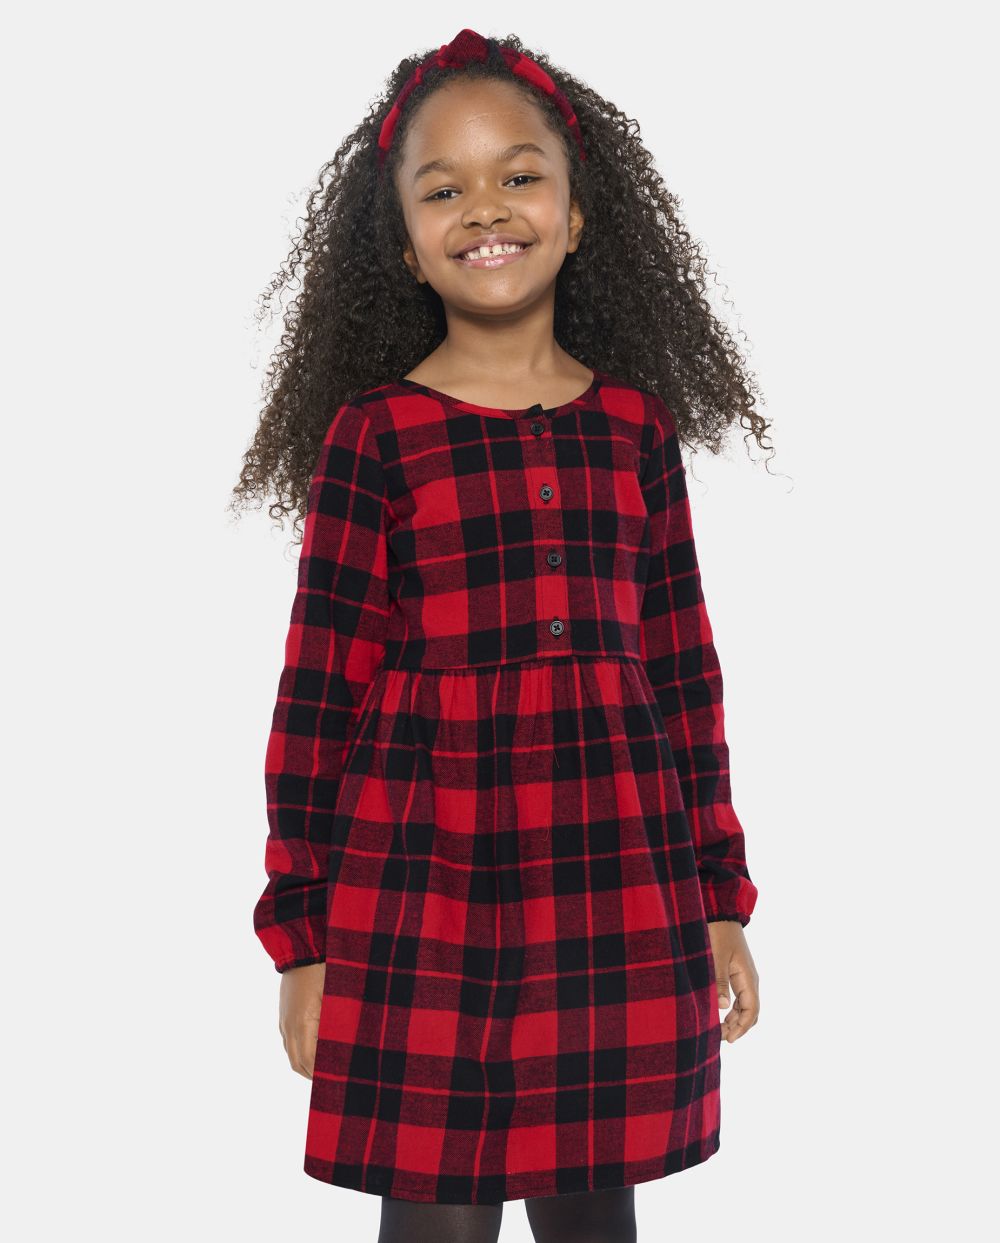 Girls Plaid Print Above the Knee Crew Neck Long Sleeves Button Front Shirt Dress